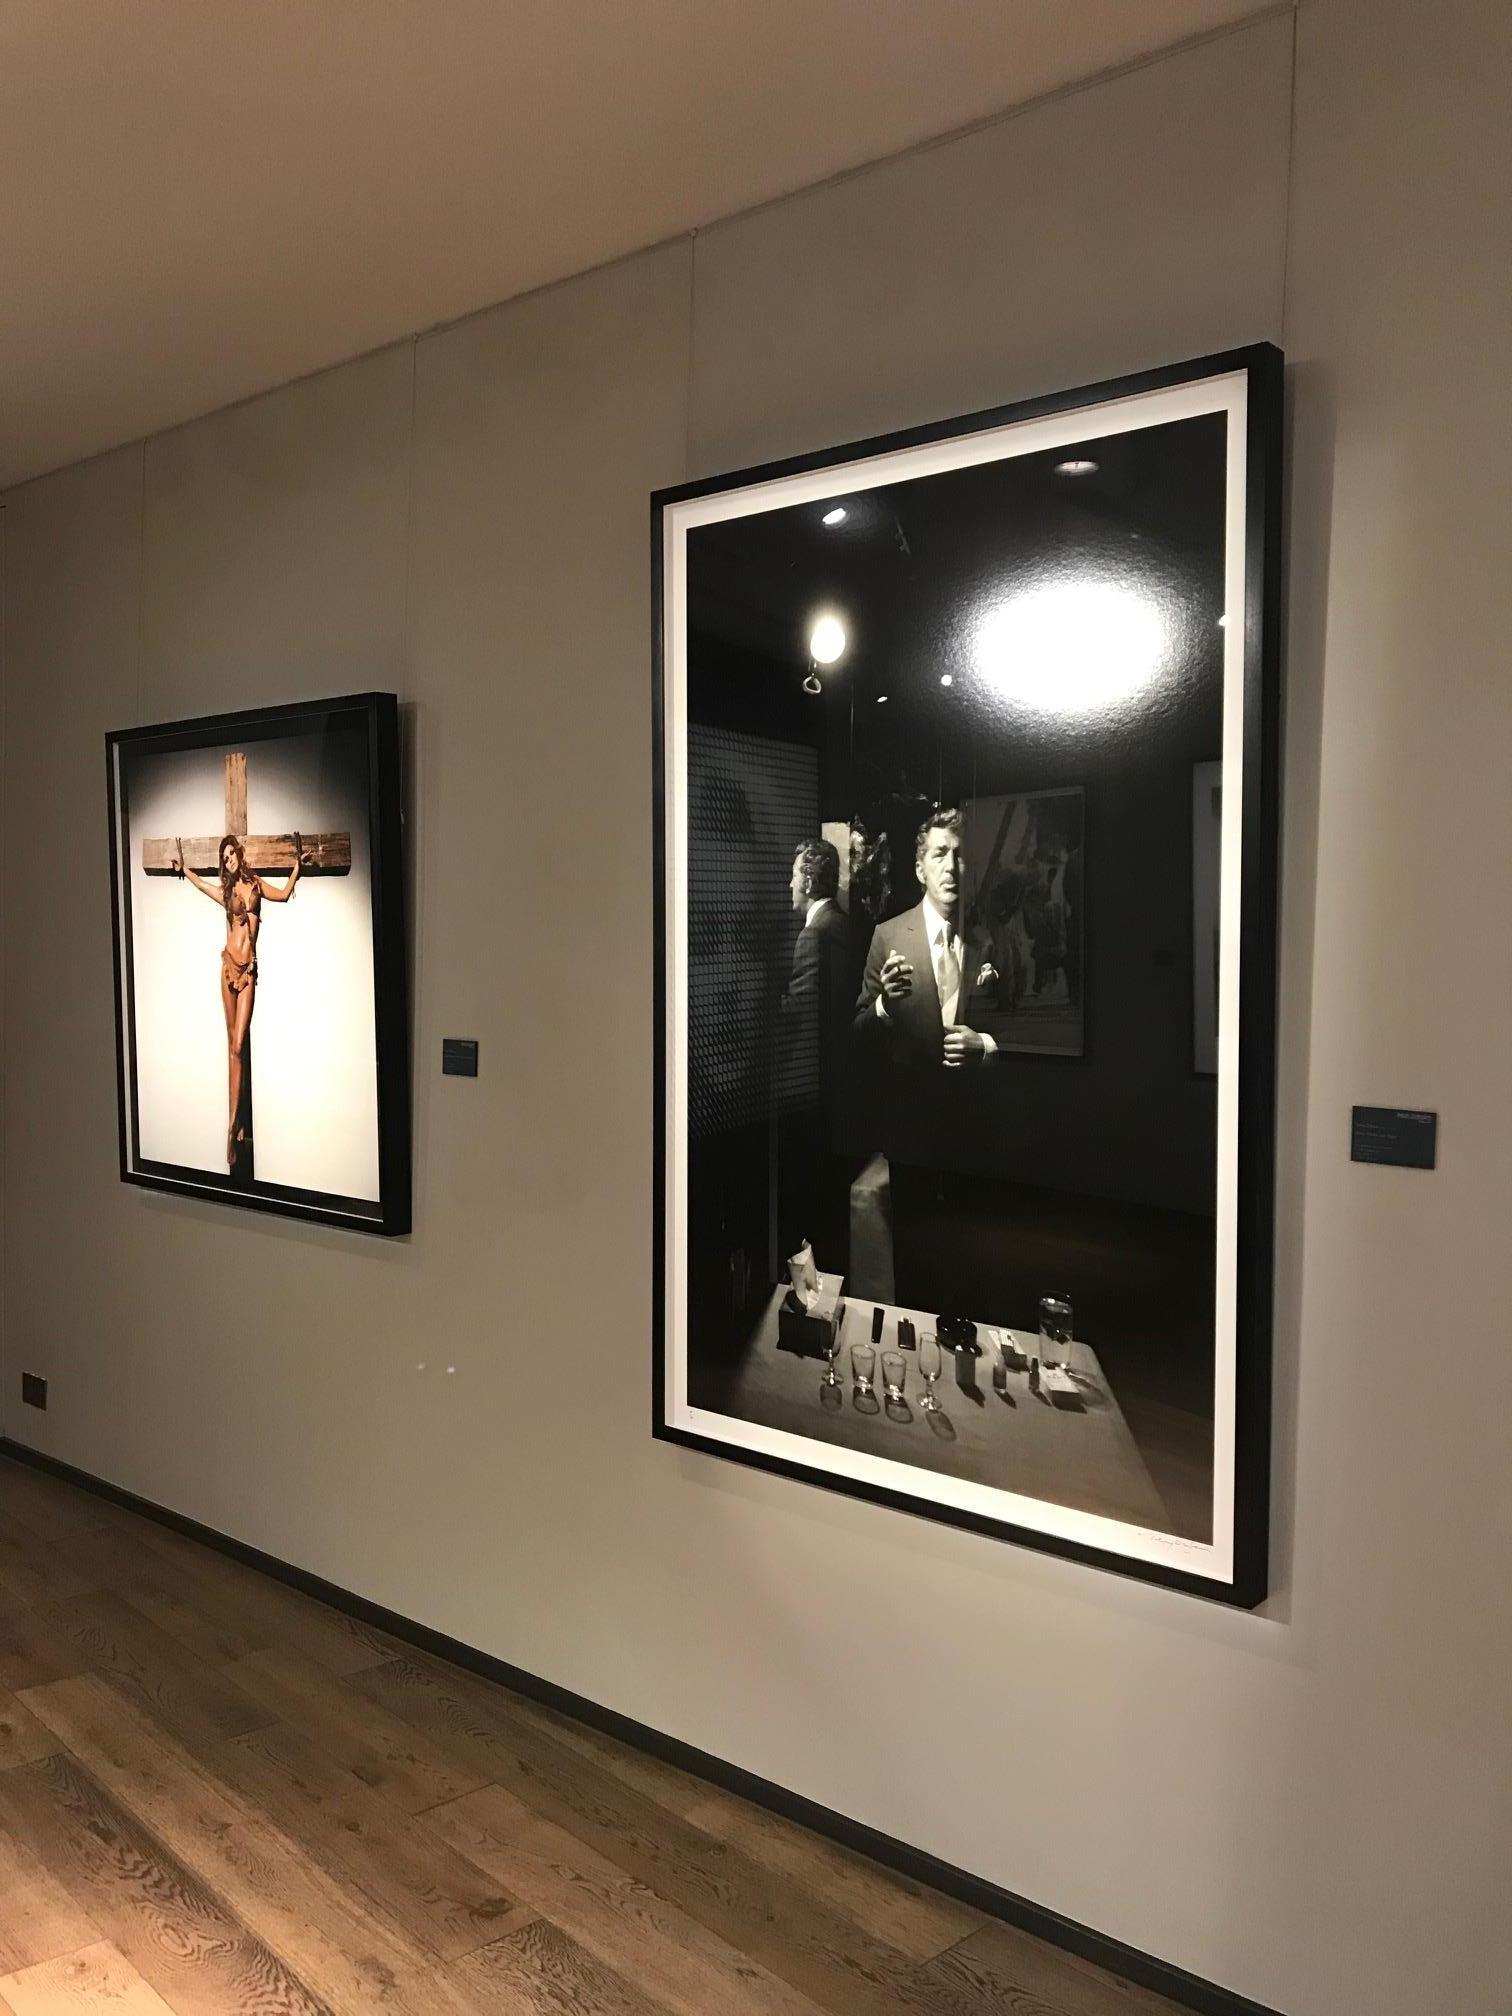 Terry O'Neill (1938-2019)
Raquel Welch on the Cross, Los Angeles
1970
lifetime edition Lambda C-Type print
48 x 48 in. (paper size)
edition of 50
signed and numbered
printed later

Price:
£25,200 GBP (inc. 20% UK VAT)

Notes:
A publicity shot for